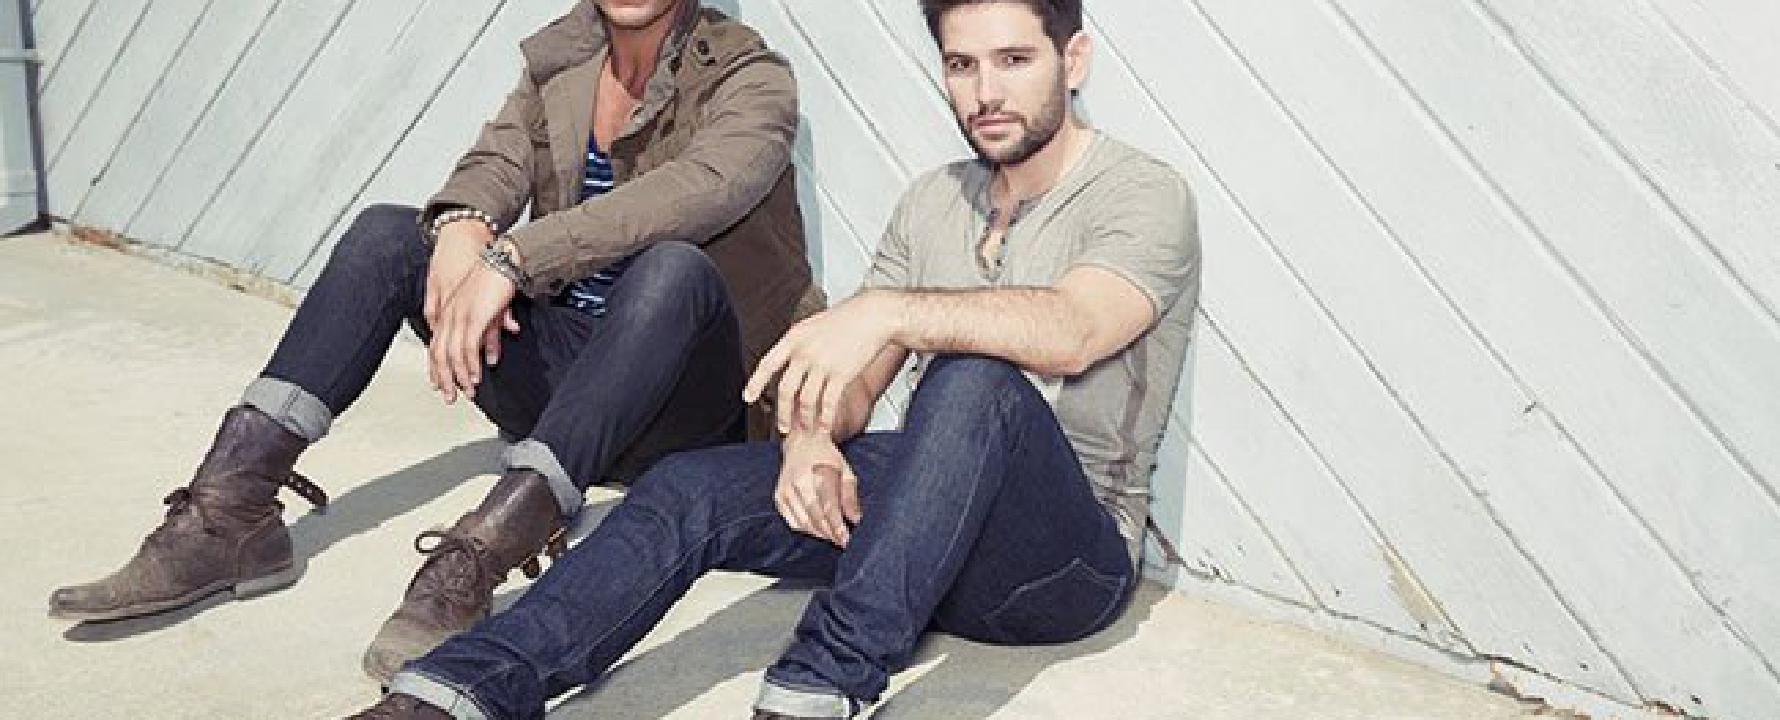 Promotional photograph of Dan + Shay.